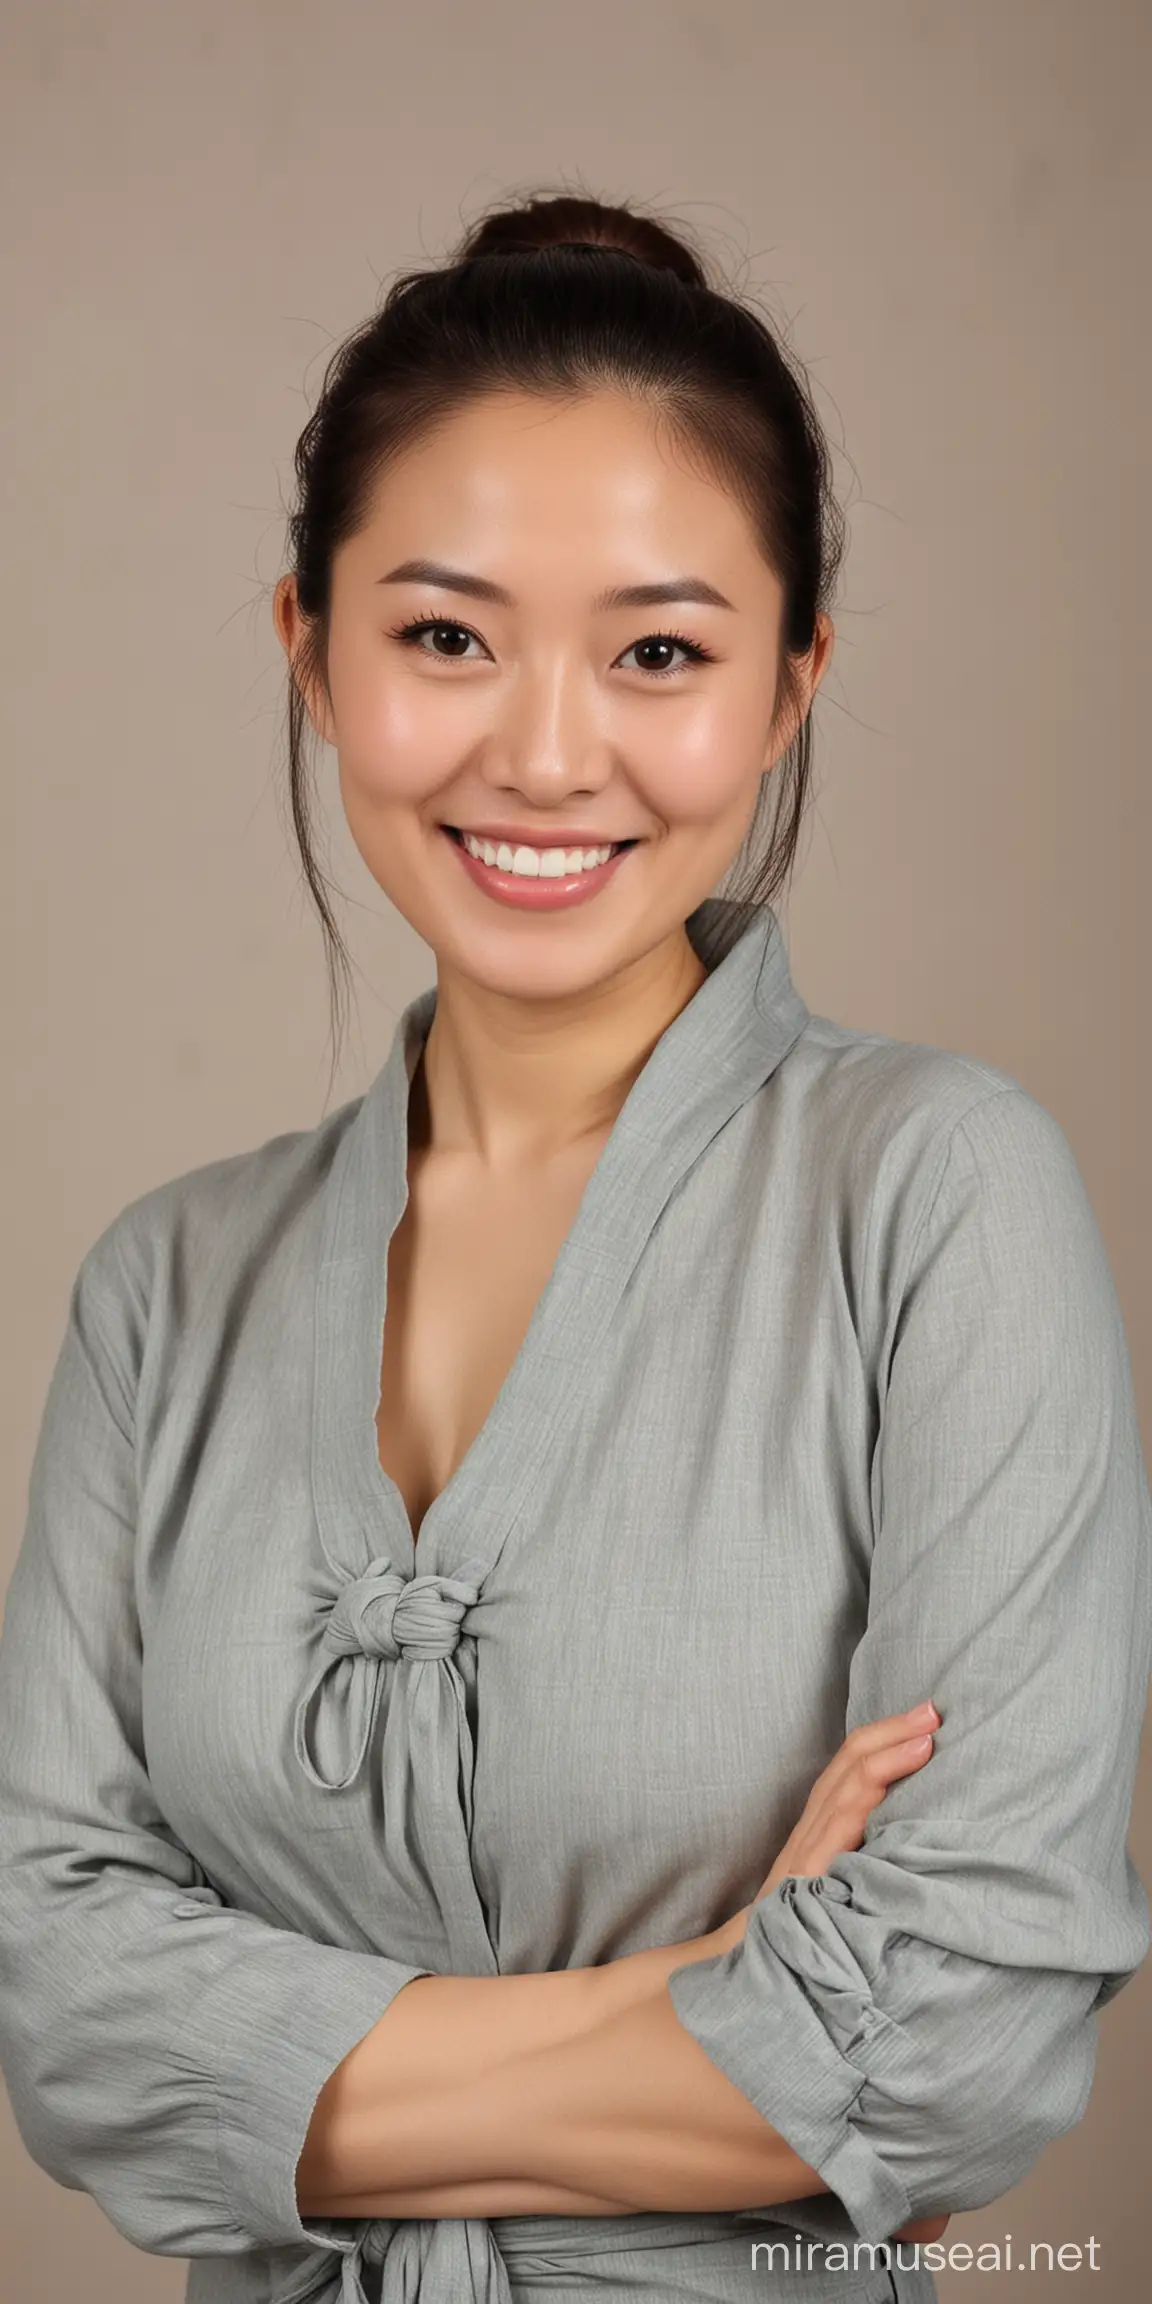 Smiling Chinese Housewife in Fashionable Attire with Ponytail